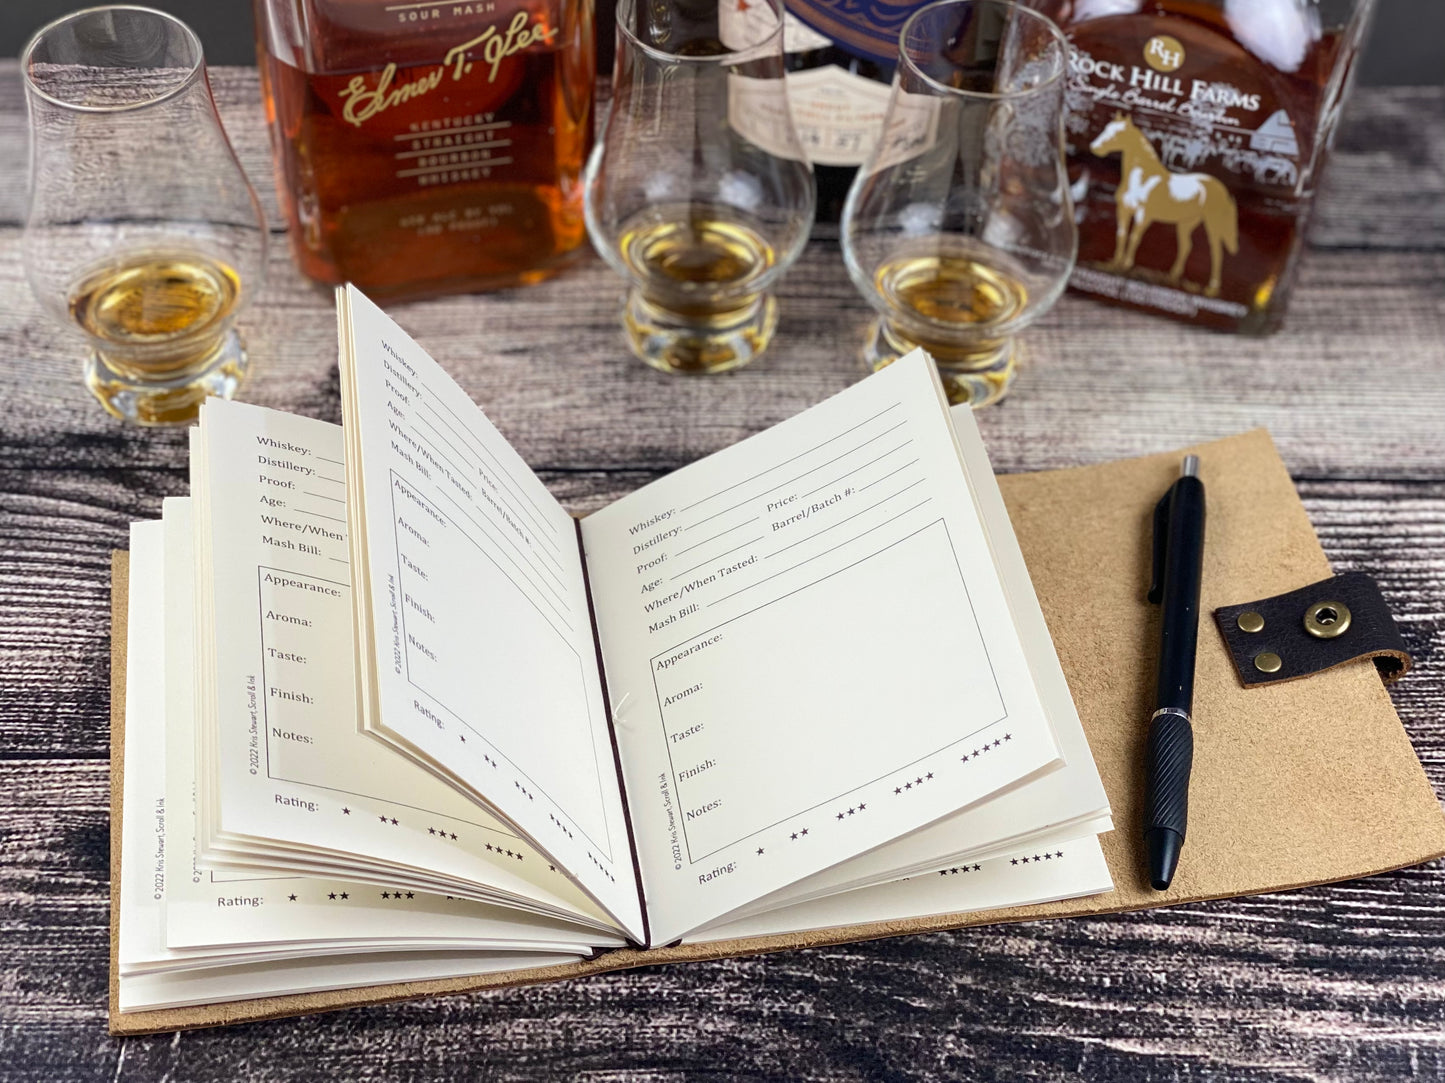 Whiskey or Bourbon Journal, Refillable Tasting Notes in Honey Bison Leather